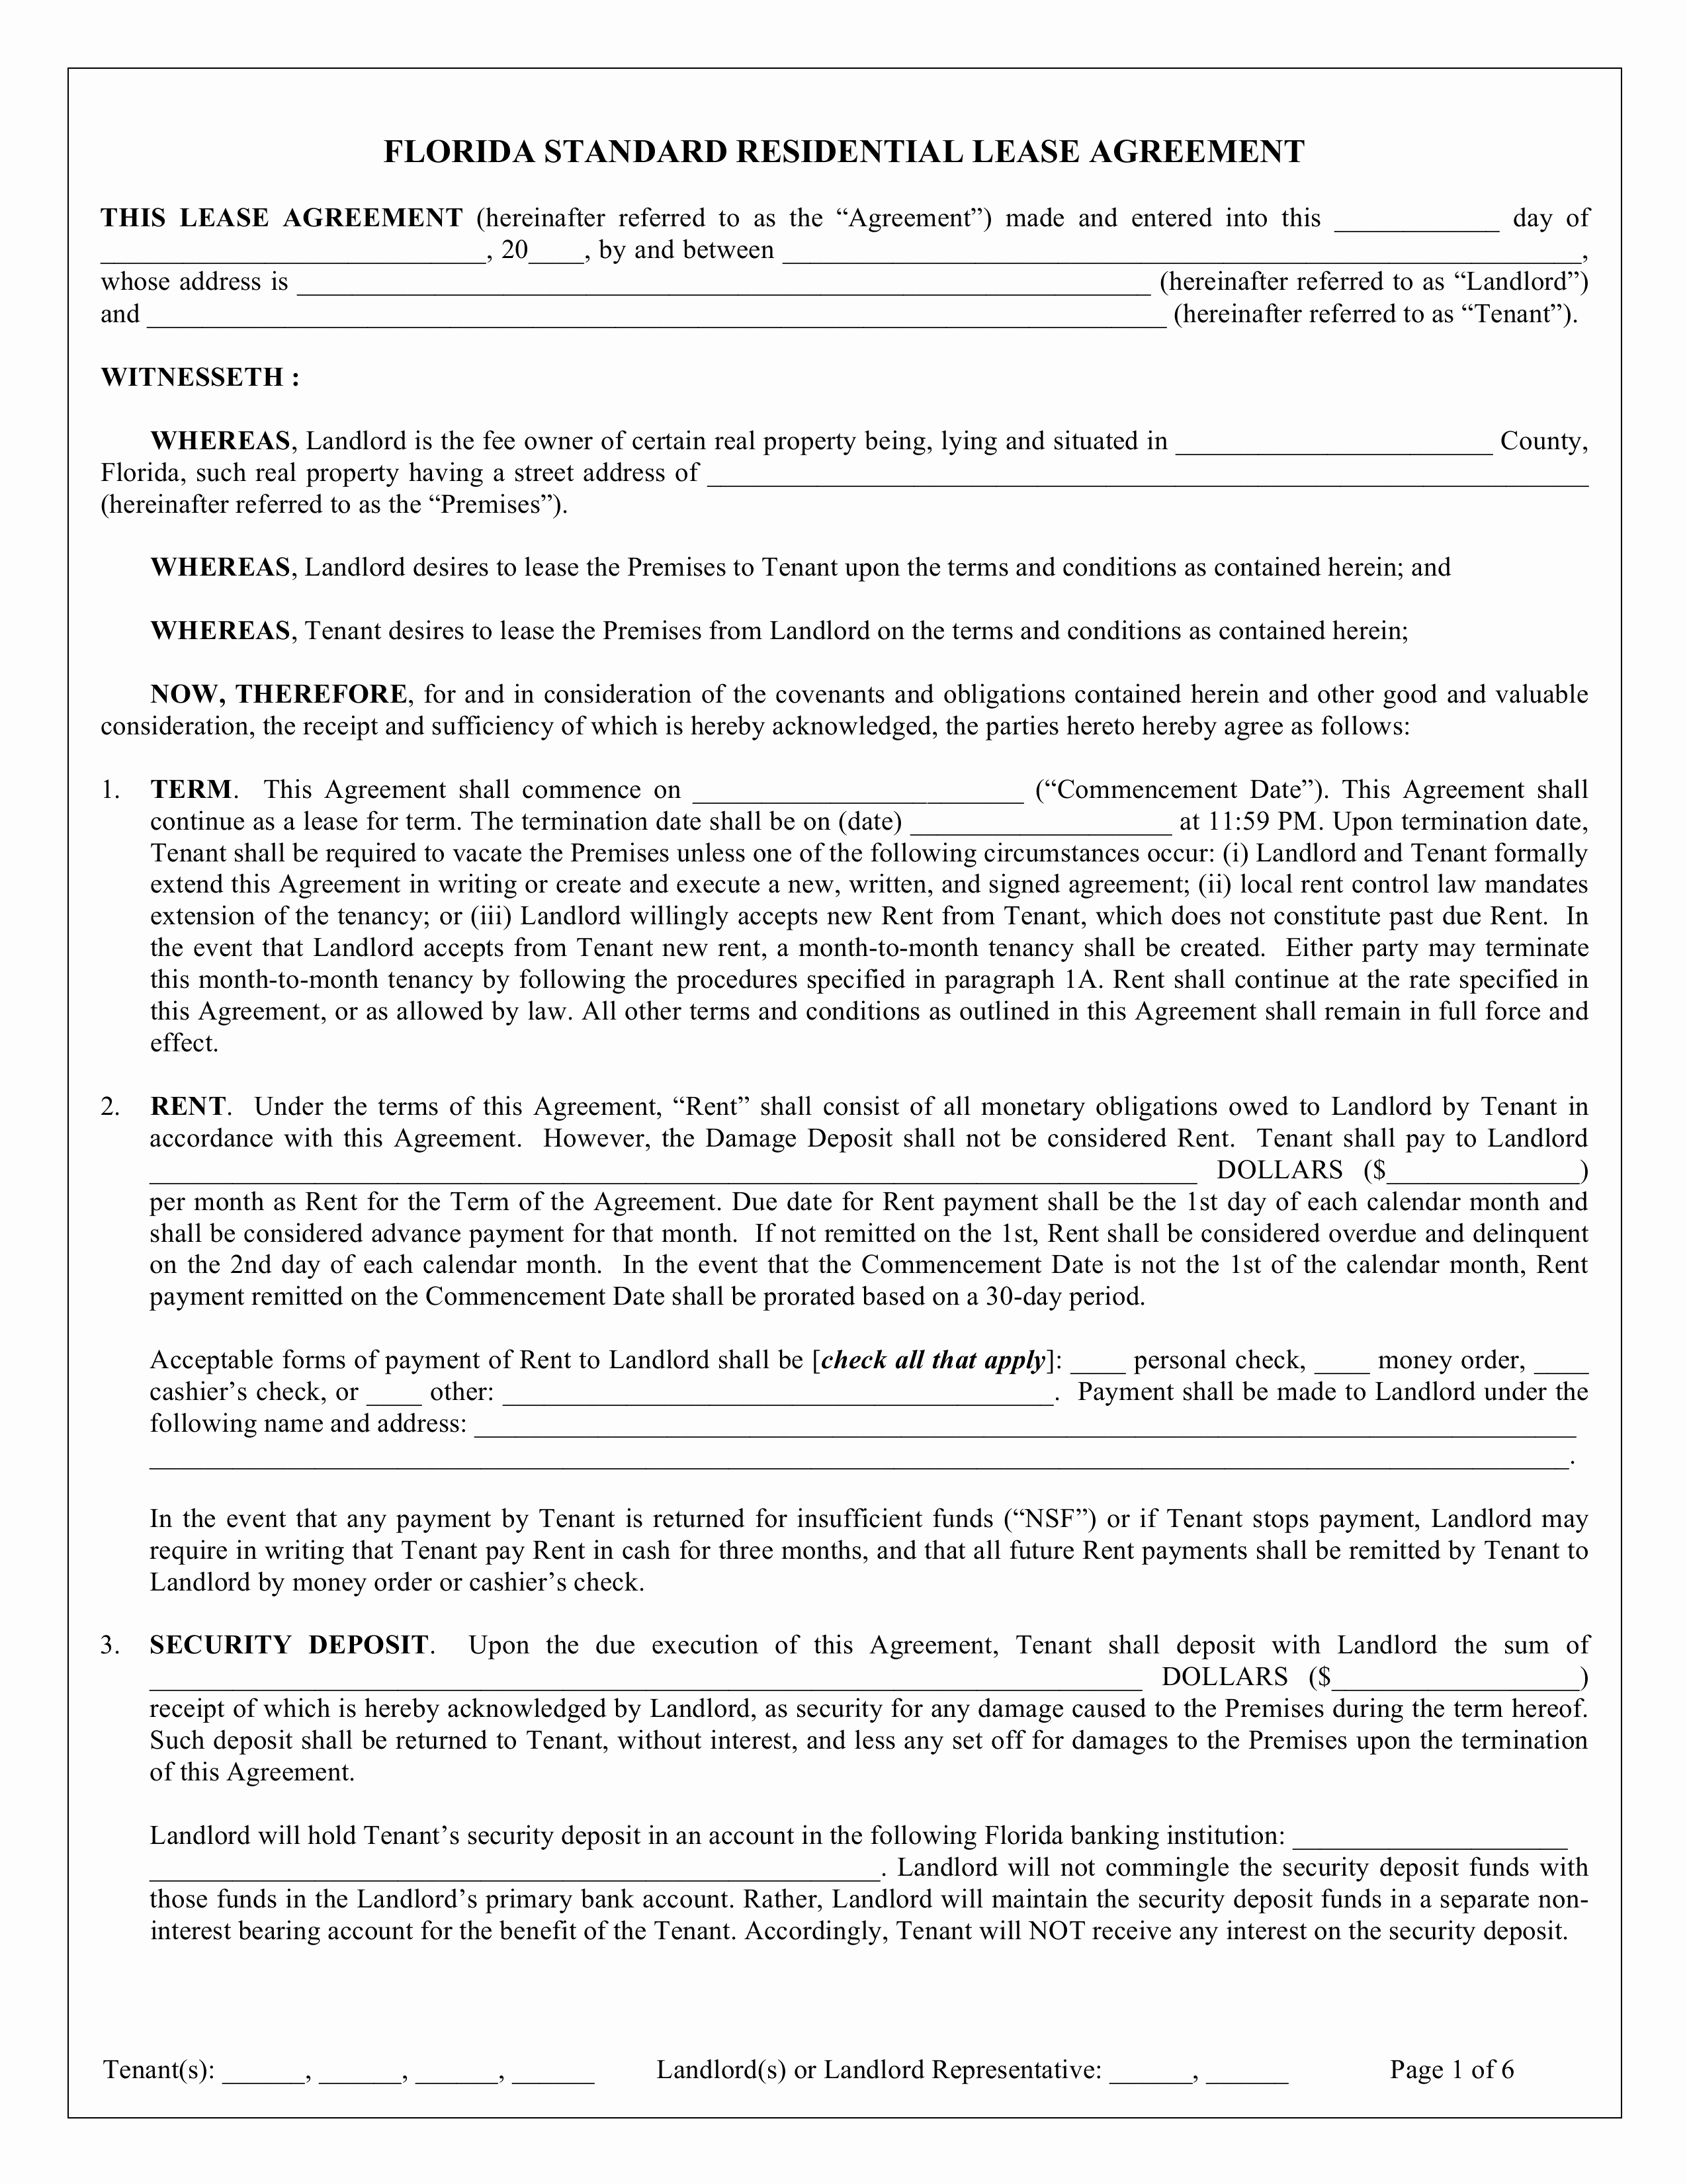 Simple Rental Agreement Template Word Lovely Free Florida Standard Residential Lease Agreement Template